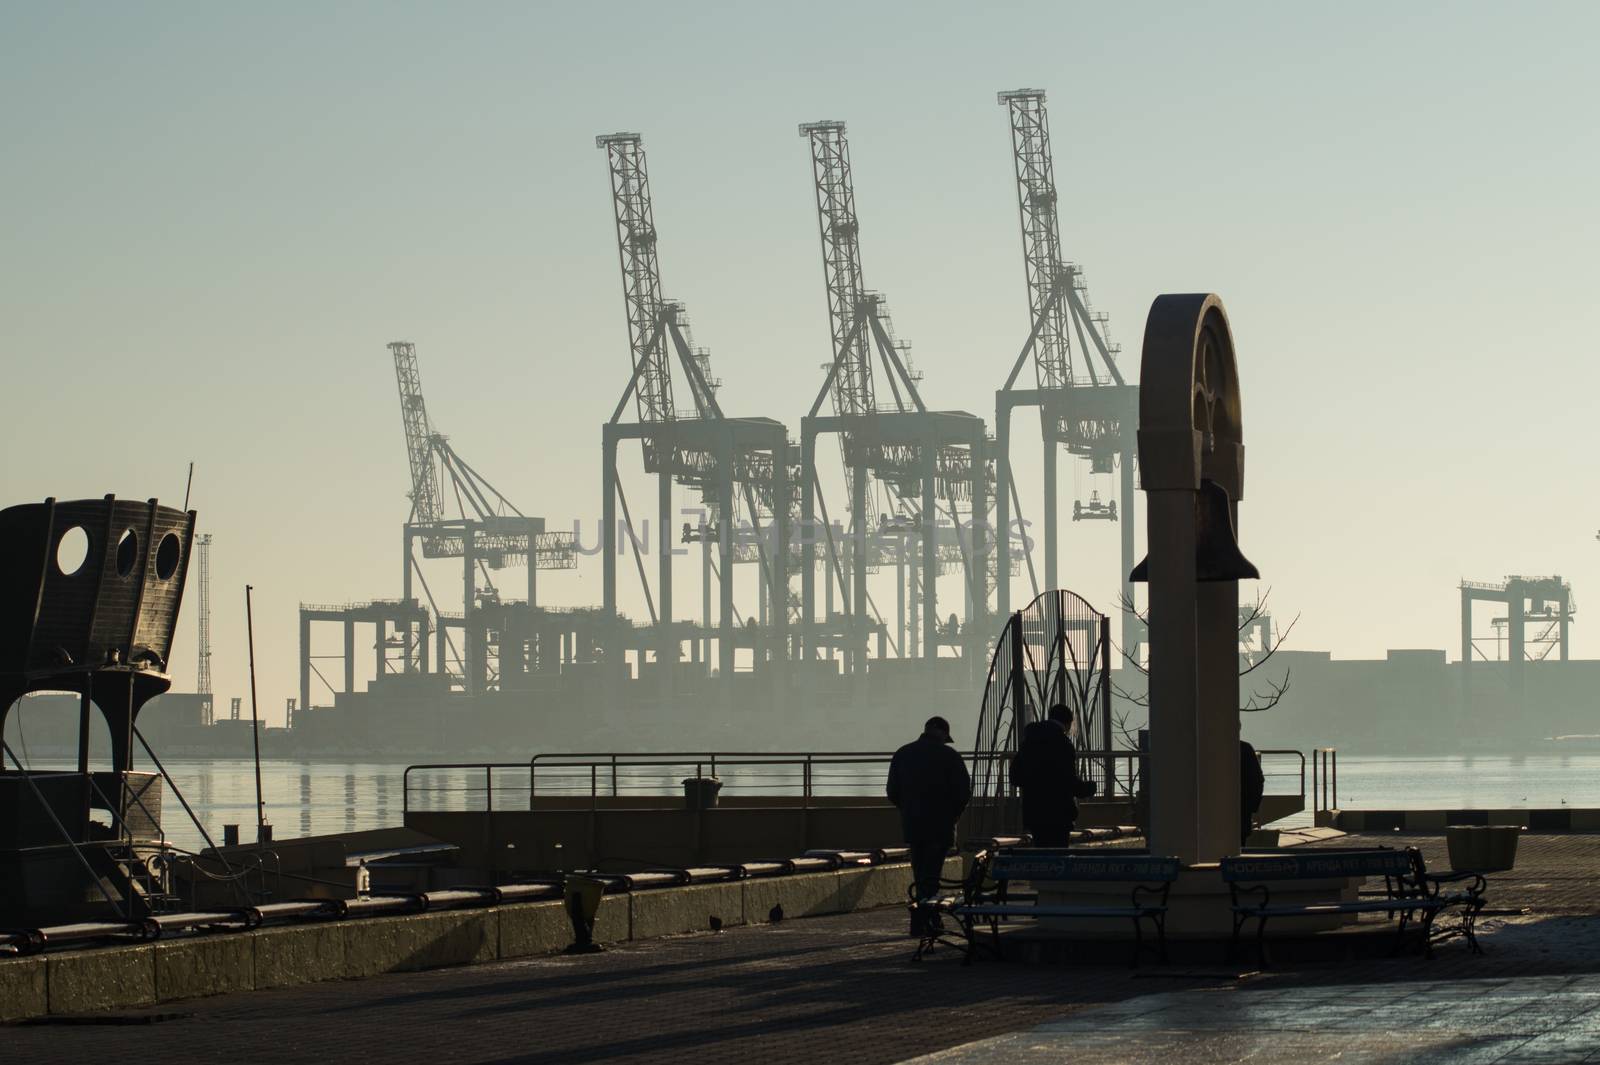 Winter Morning at the Cargo Port by Multipedia